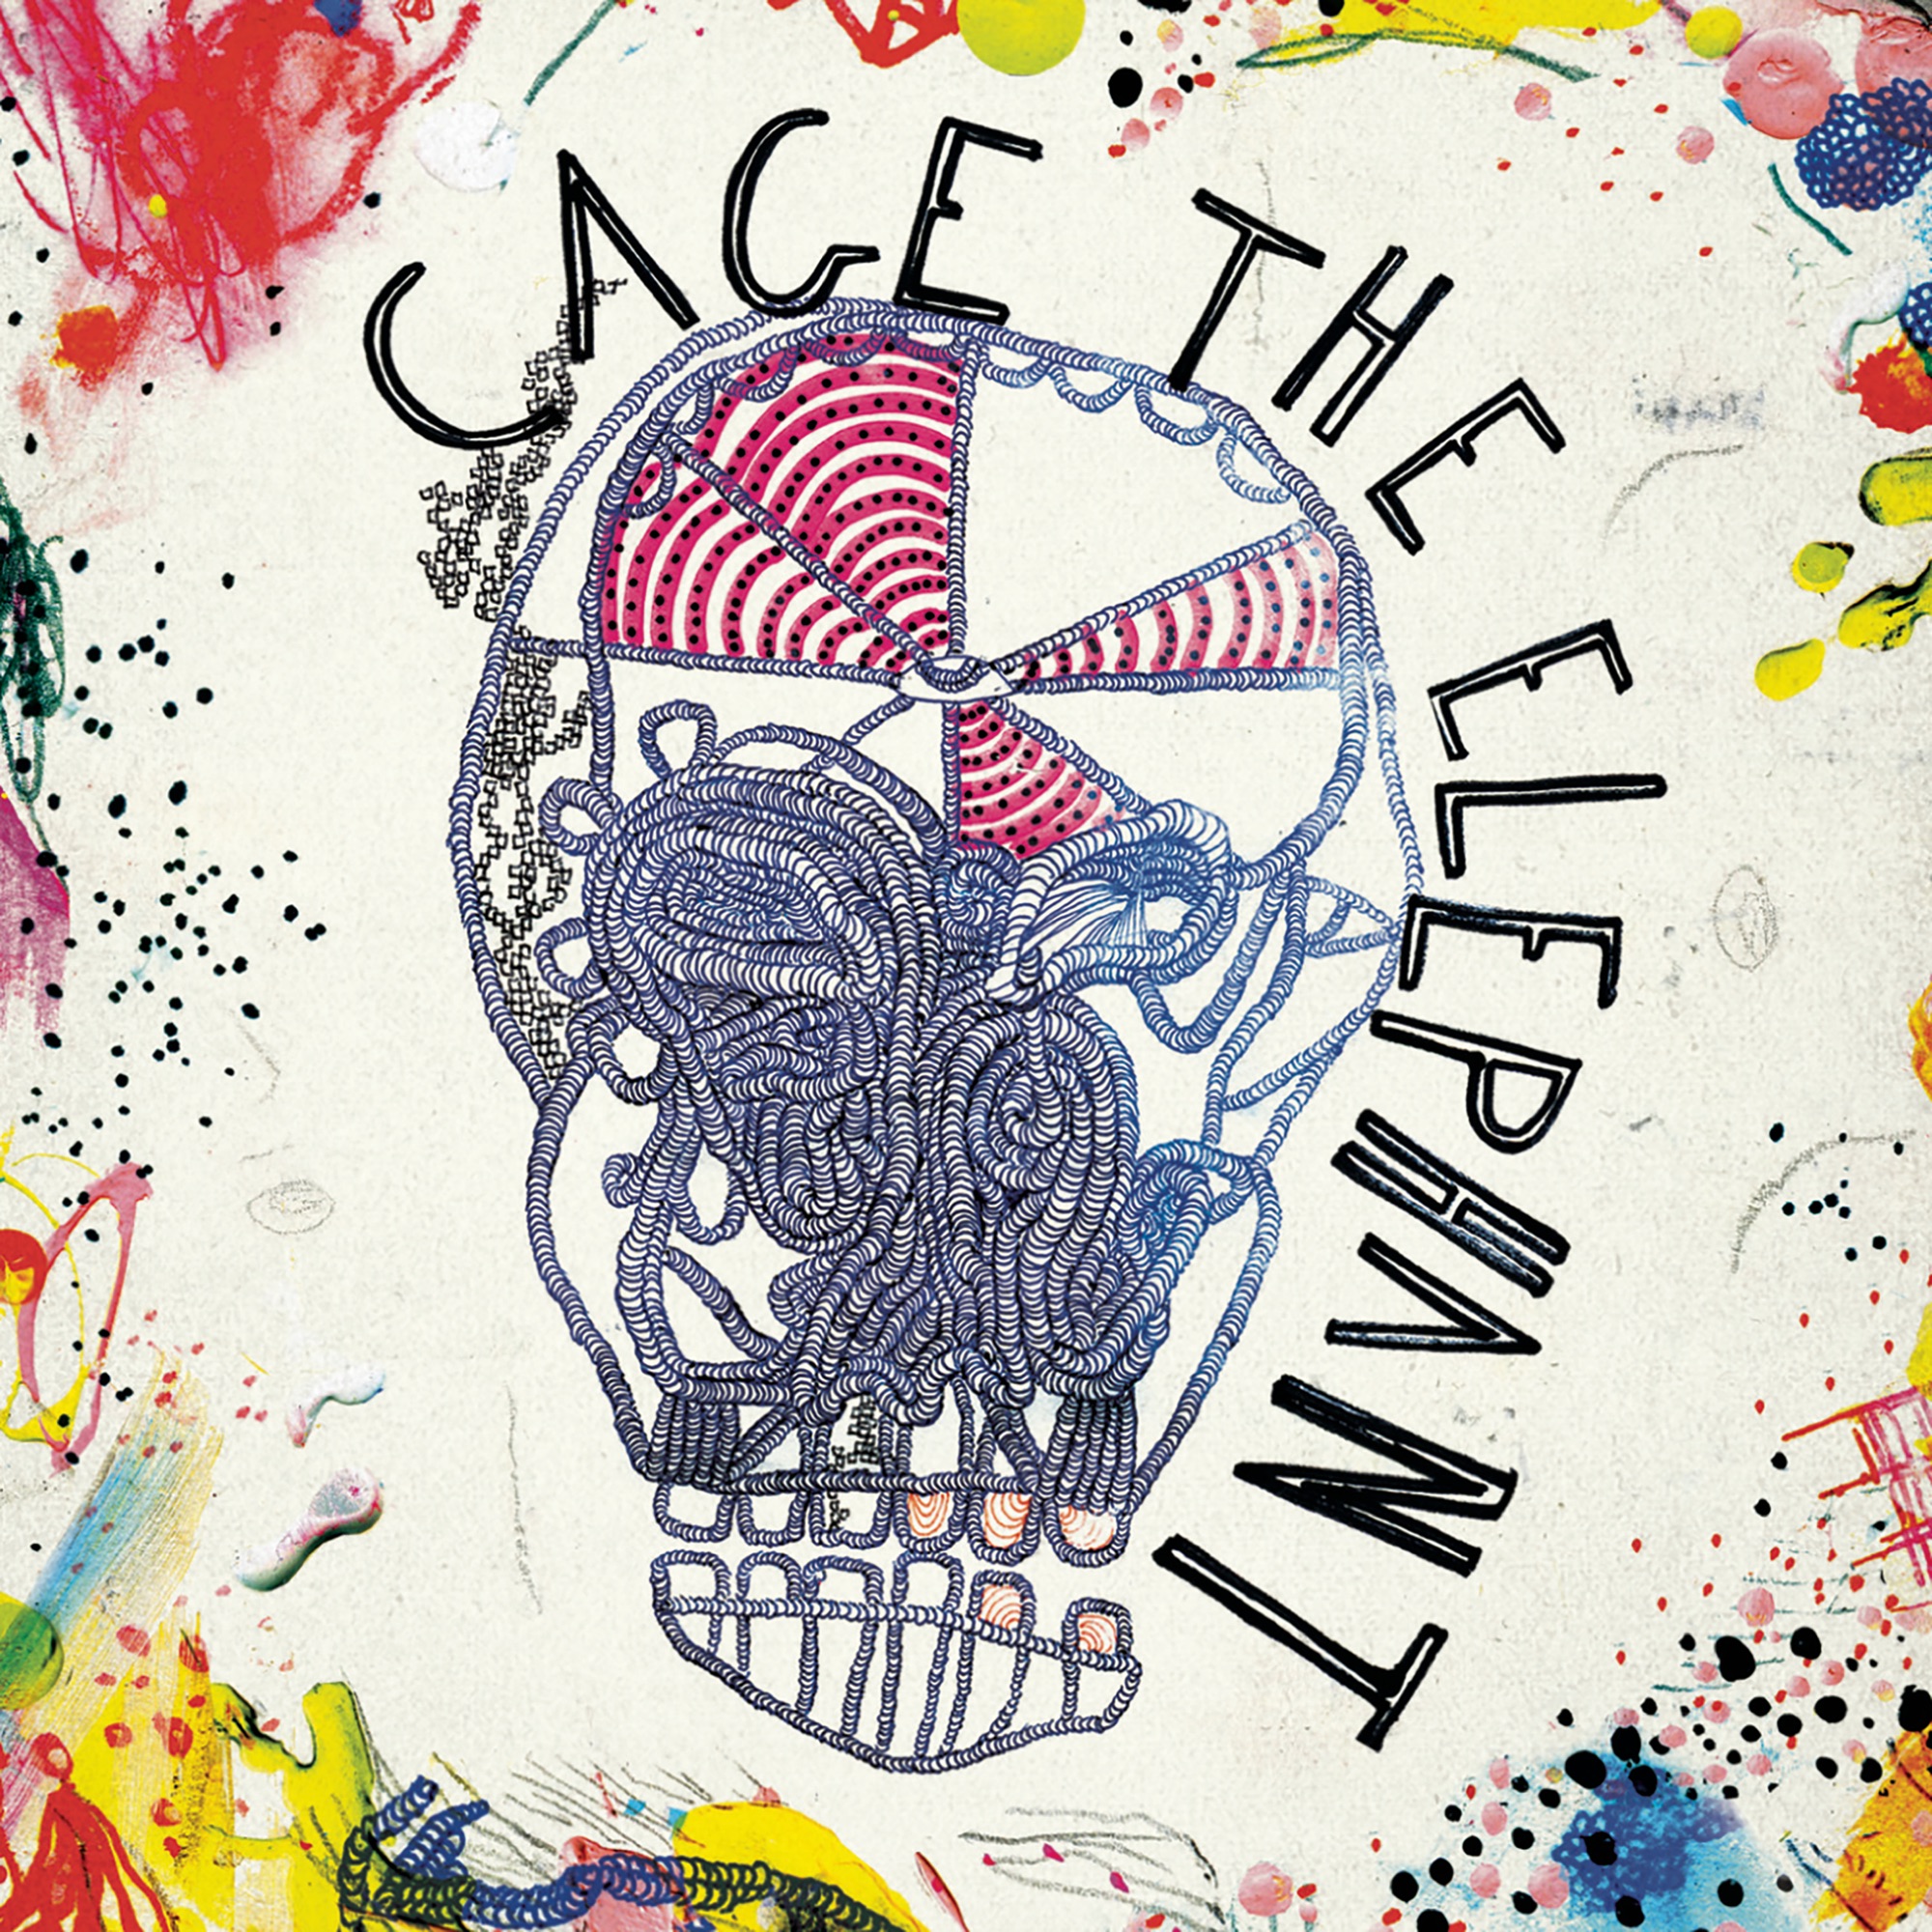 Cage the Elephant - Cage the Elephant (Expanded Edition)